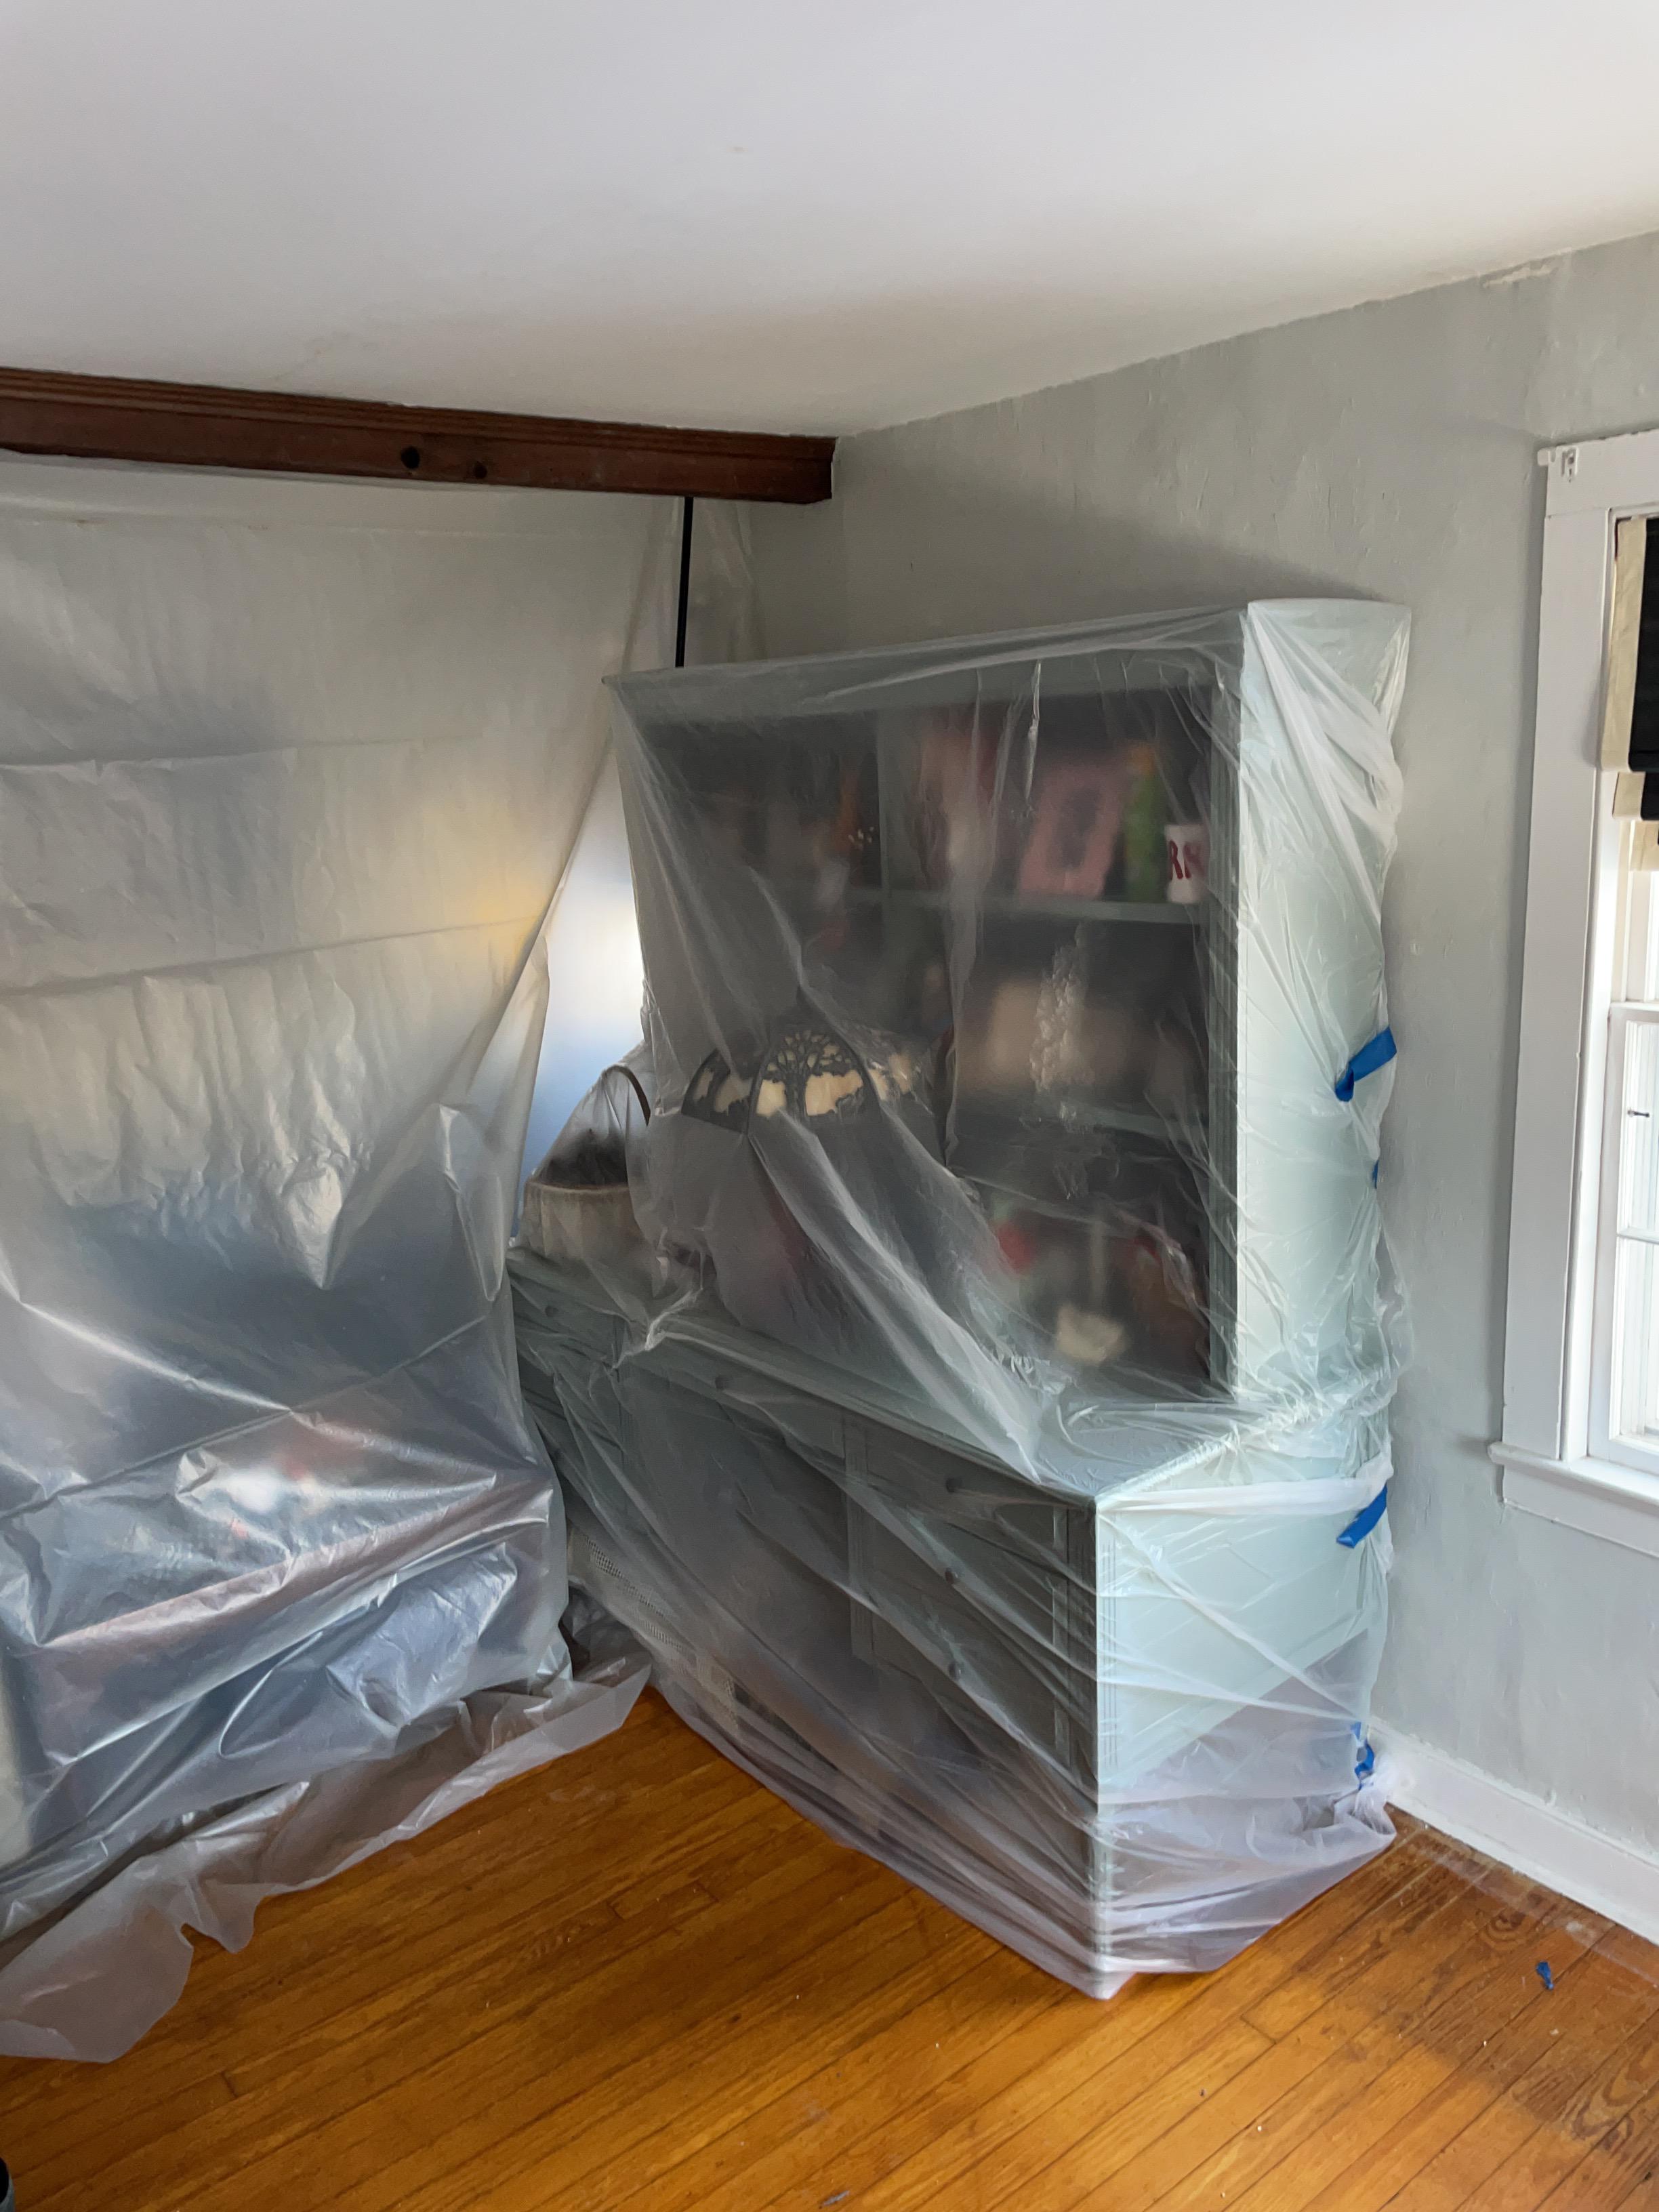 Protected plastic covering for furniture. Sealing off room.